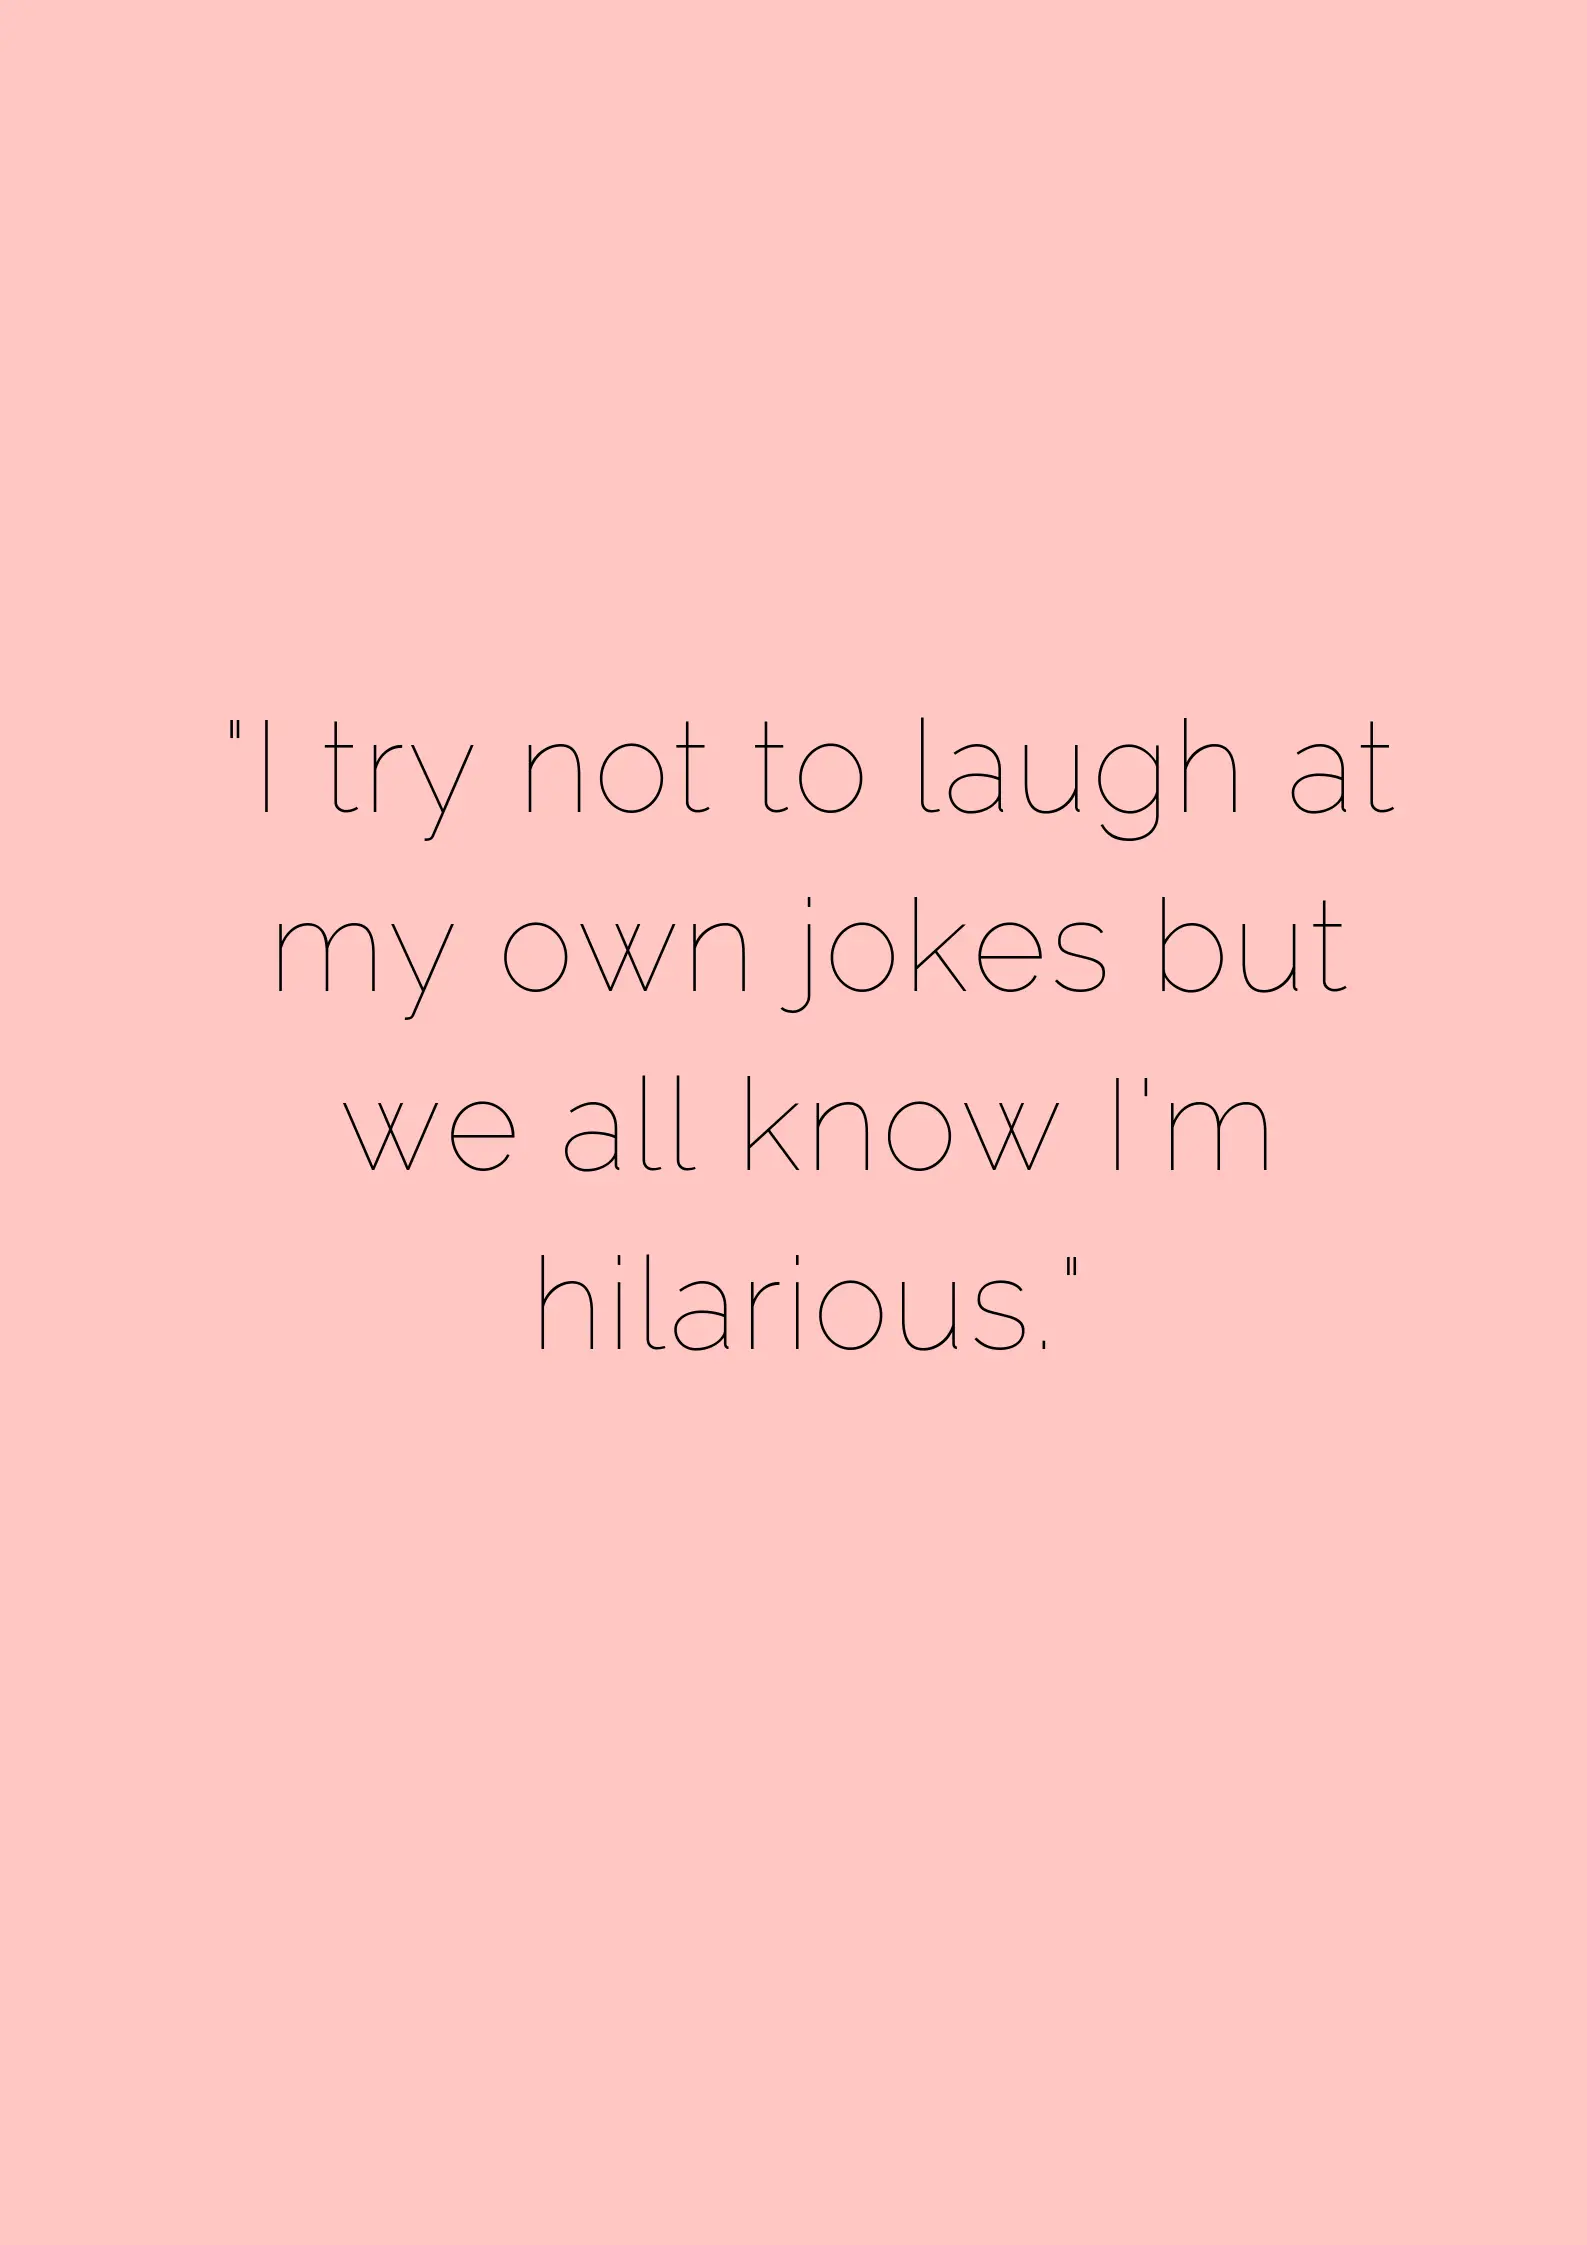 50 Best Funny Quotes To Share With Your Friends - museuly